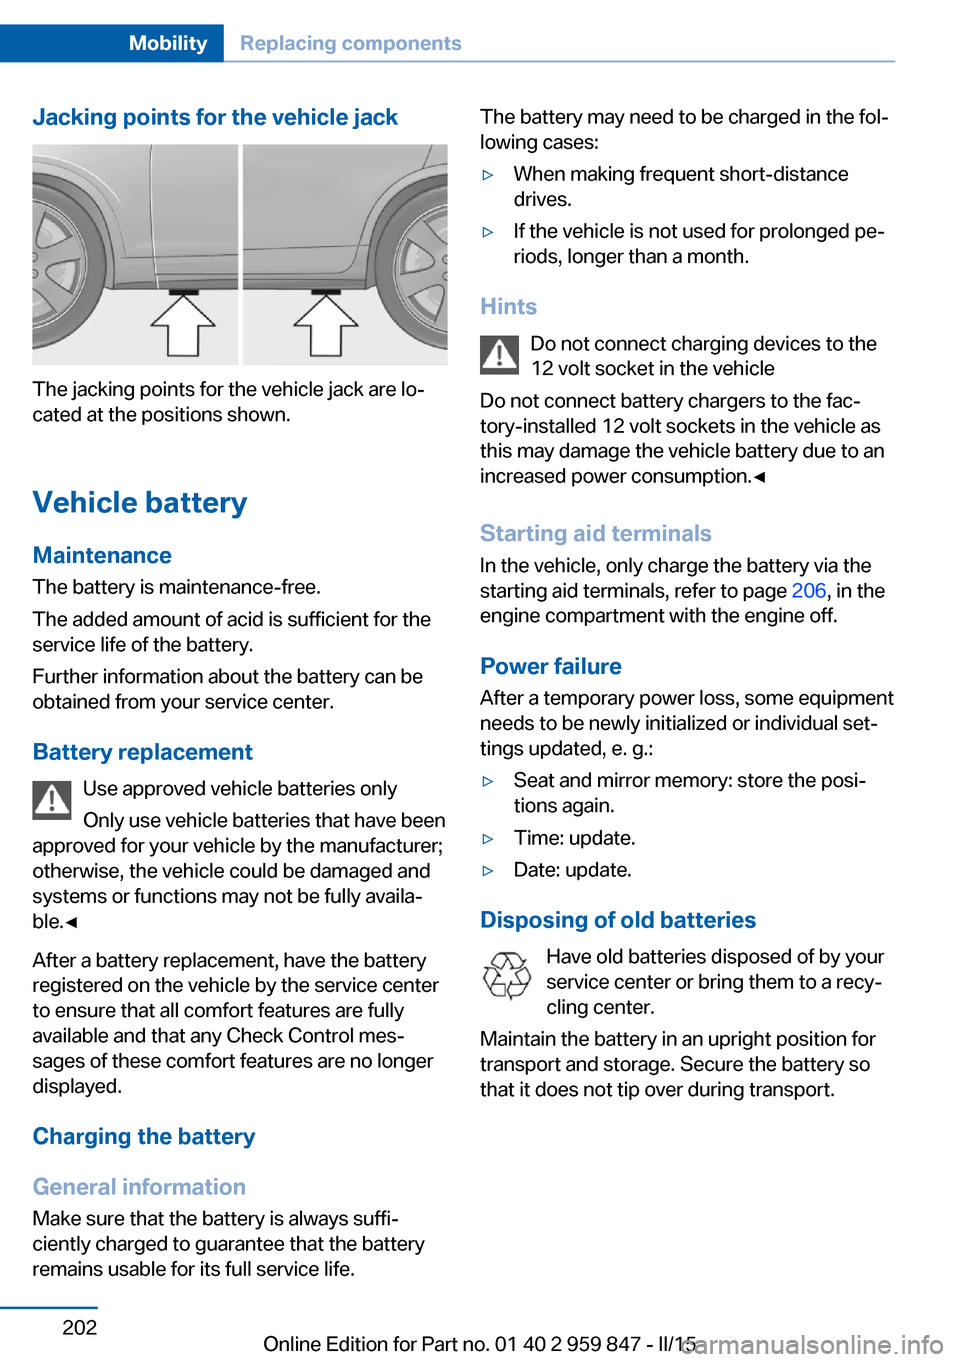 BMW 2 SERIES CONVERTIBLE 2015 F23 Owners Guide Jacking points for the vehicle jack
The jacking points for the vehicle jack are lo‐
cated at the positions shown.
Vehicle battery Maintenance
The battery is maintenance-free.
The added amount of aci